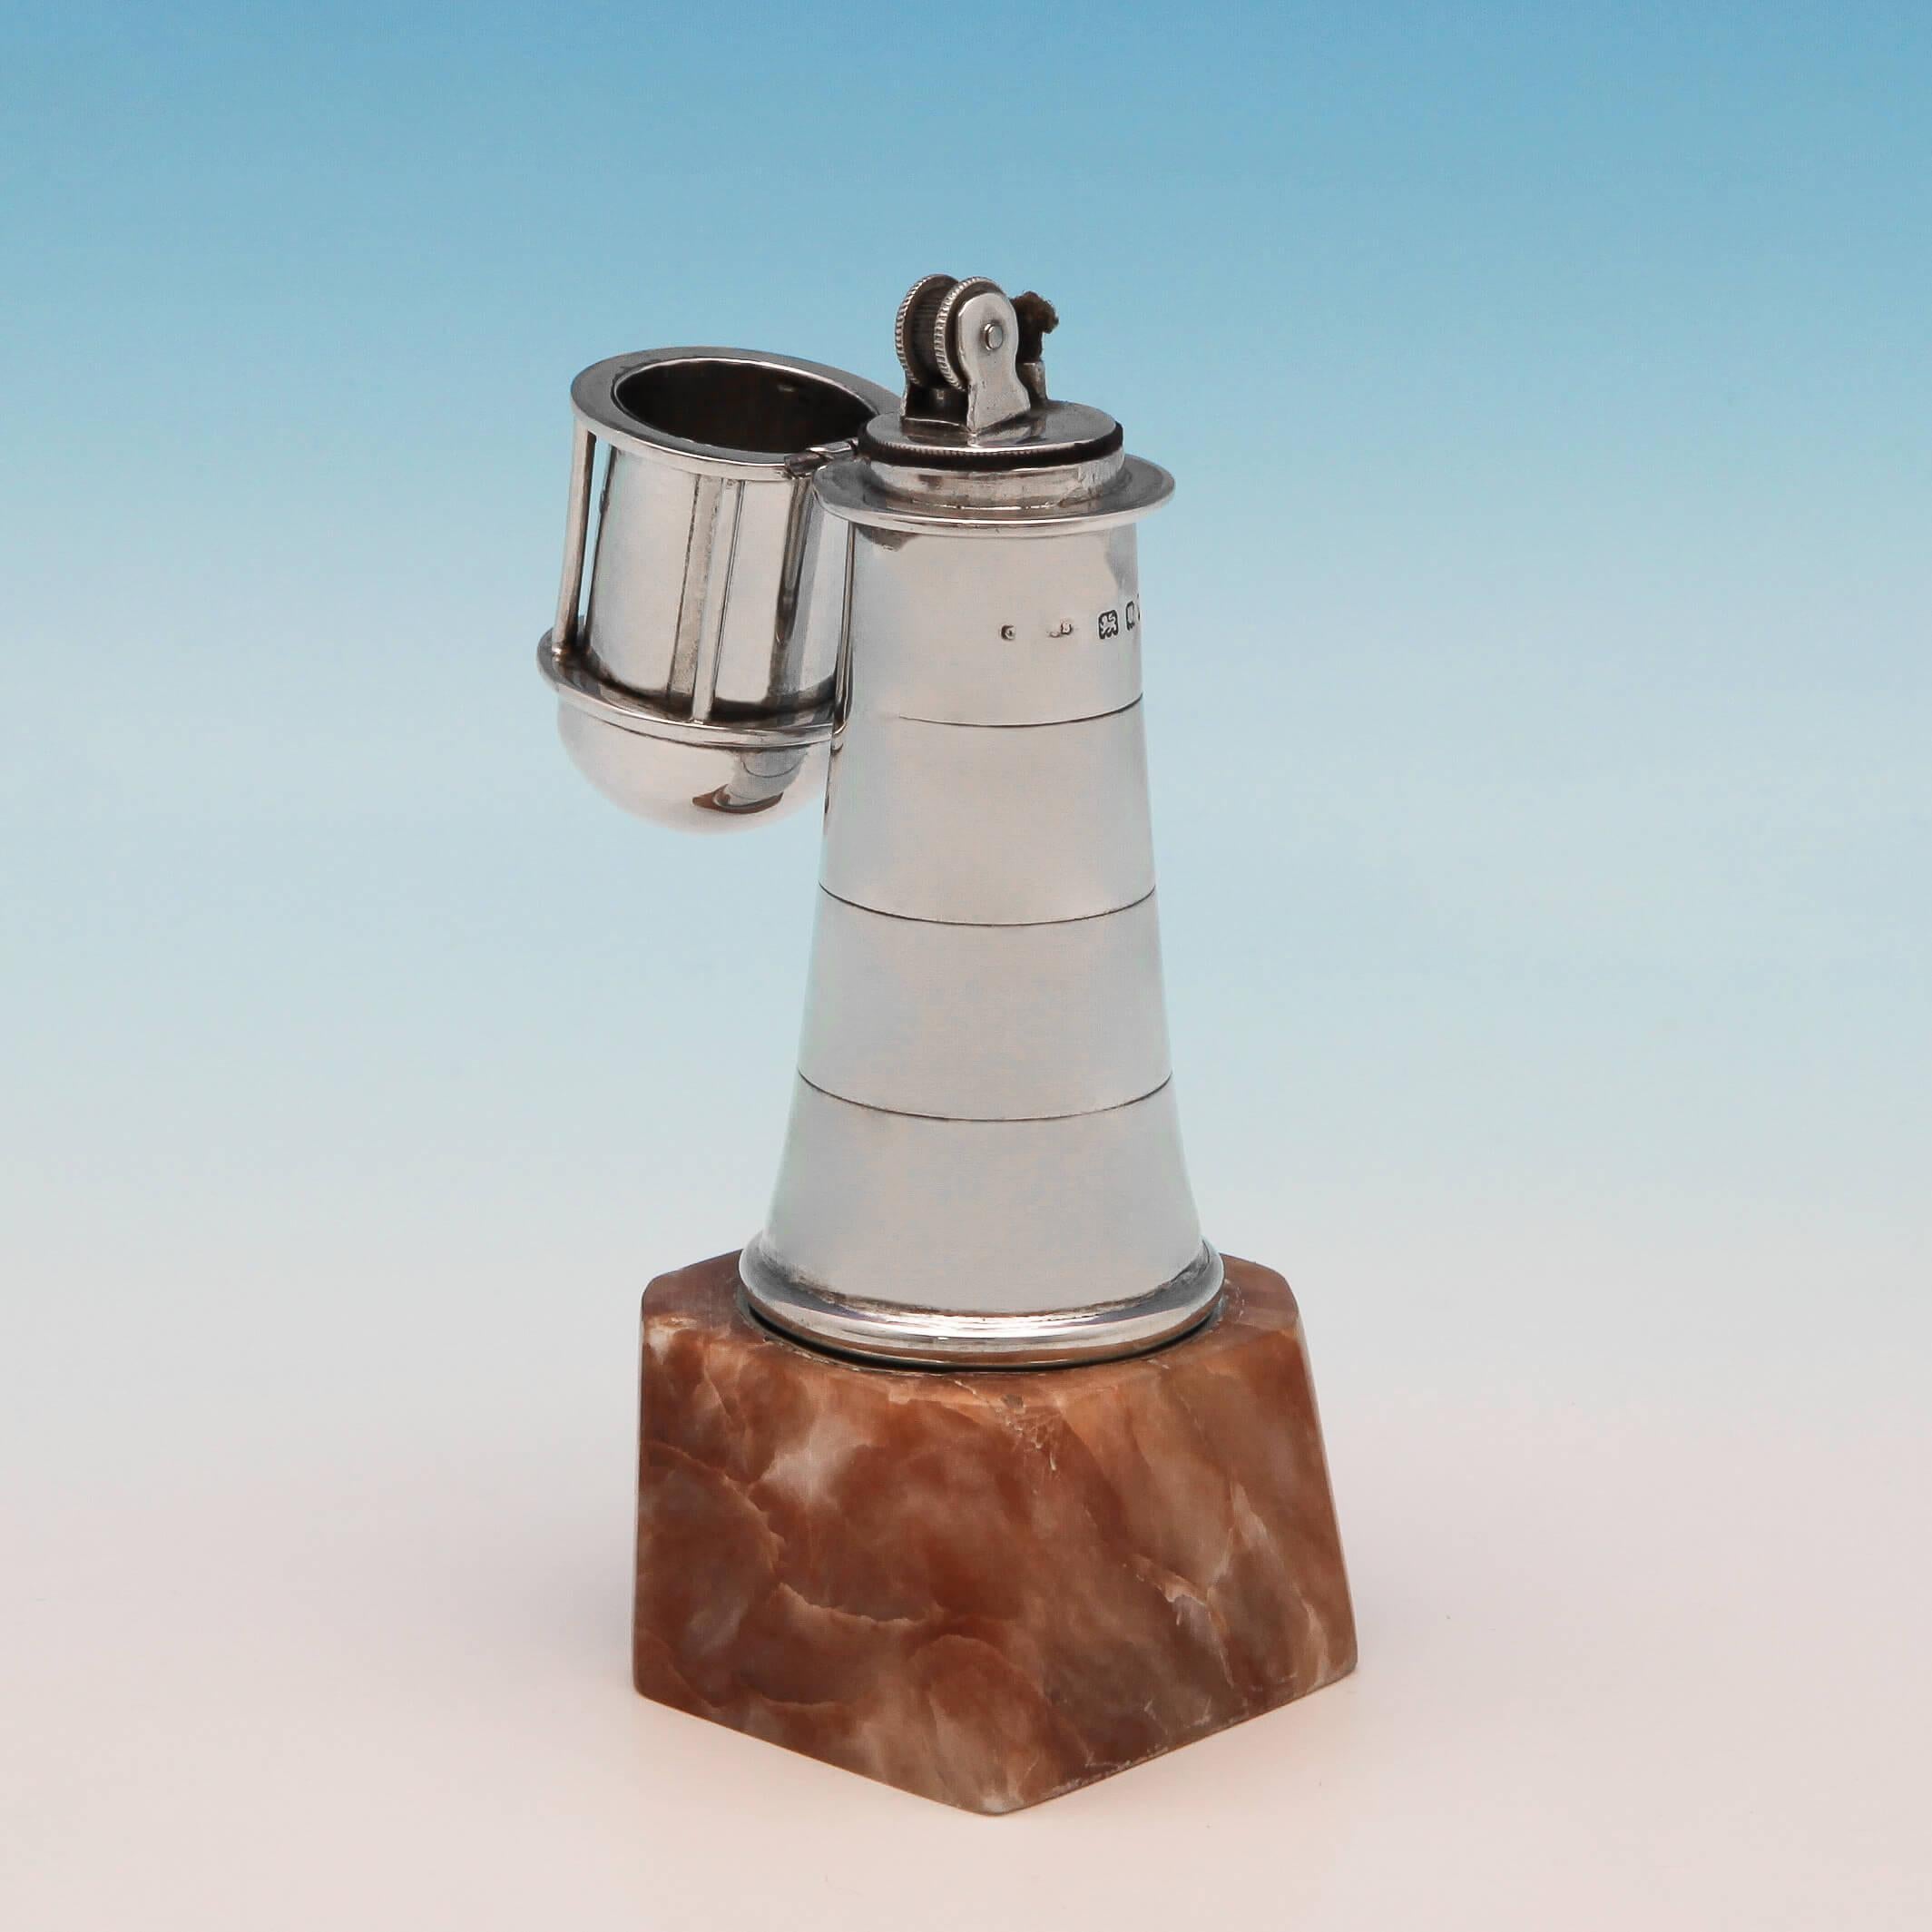 Hallmarked in London in 1932, this unusual, George V, sterling silver cigar lighter, is modelled in the shape of a lighthouse, standing on a soapstone base. The cigar or cigarette lighter measures: 5